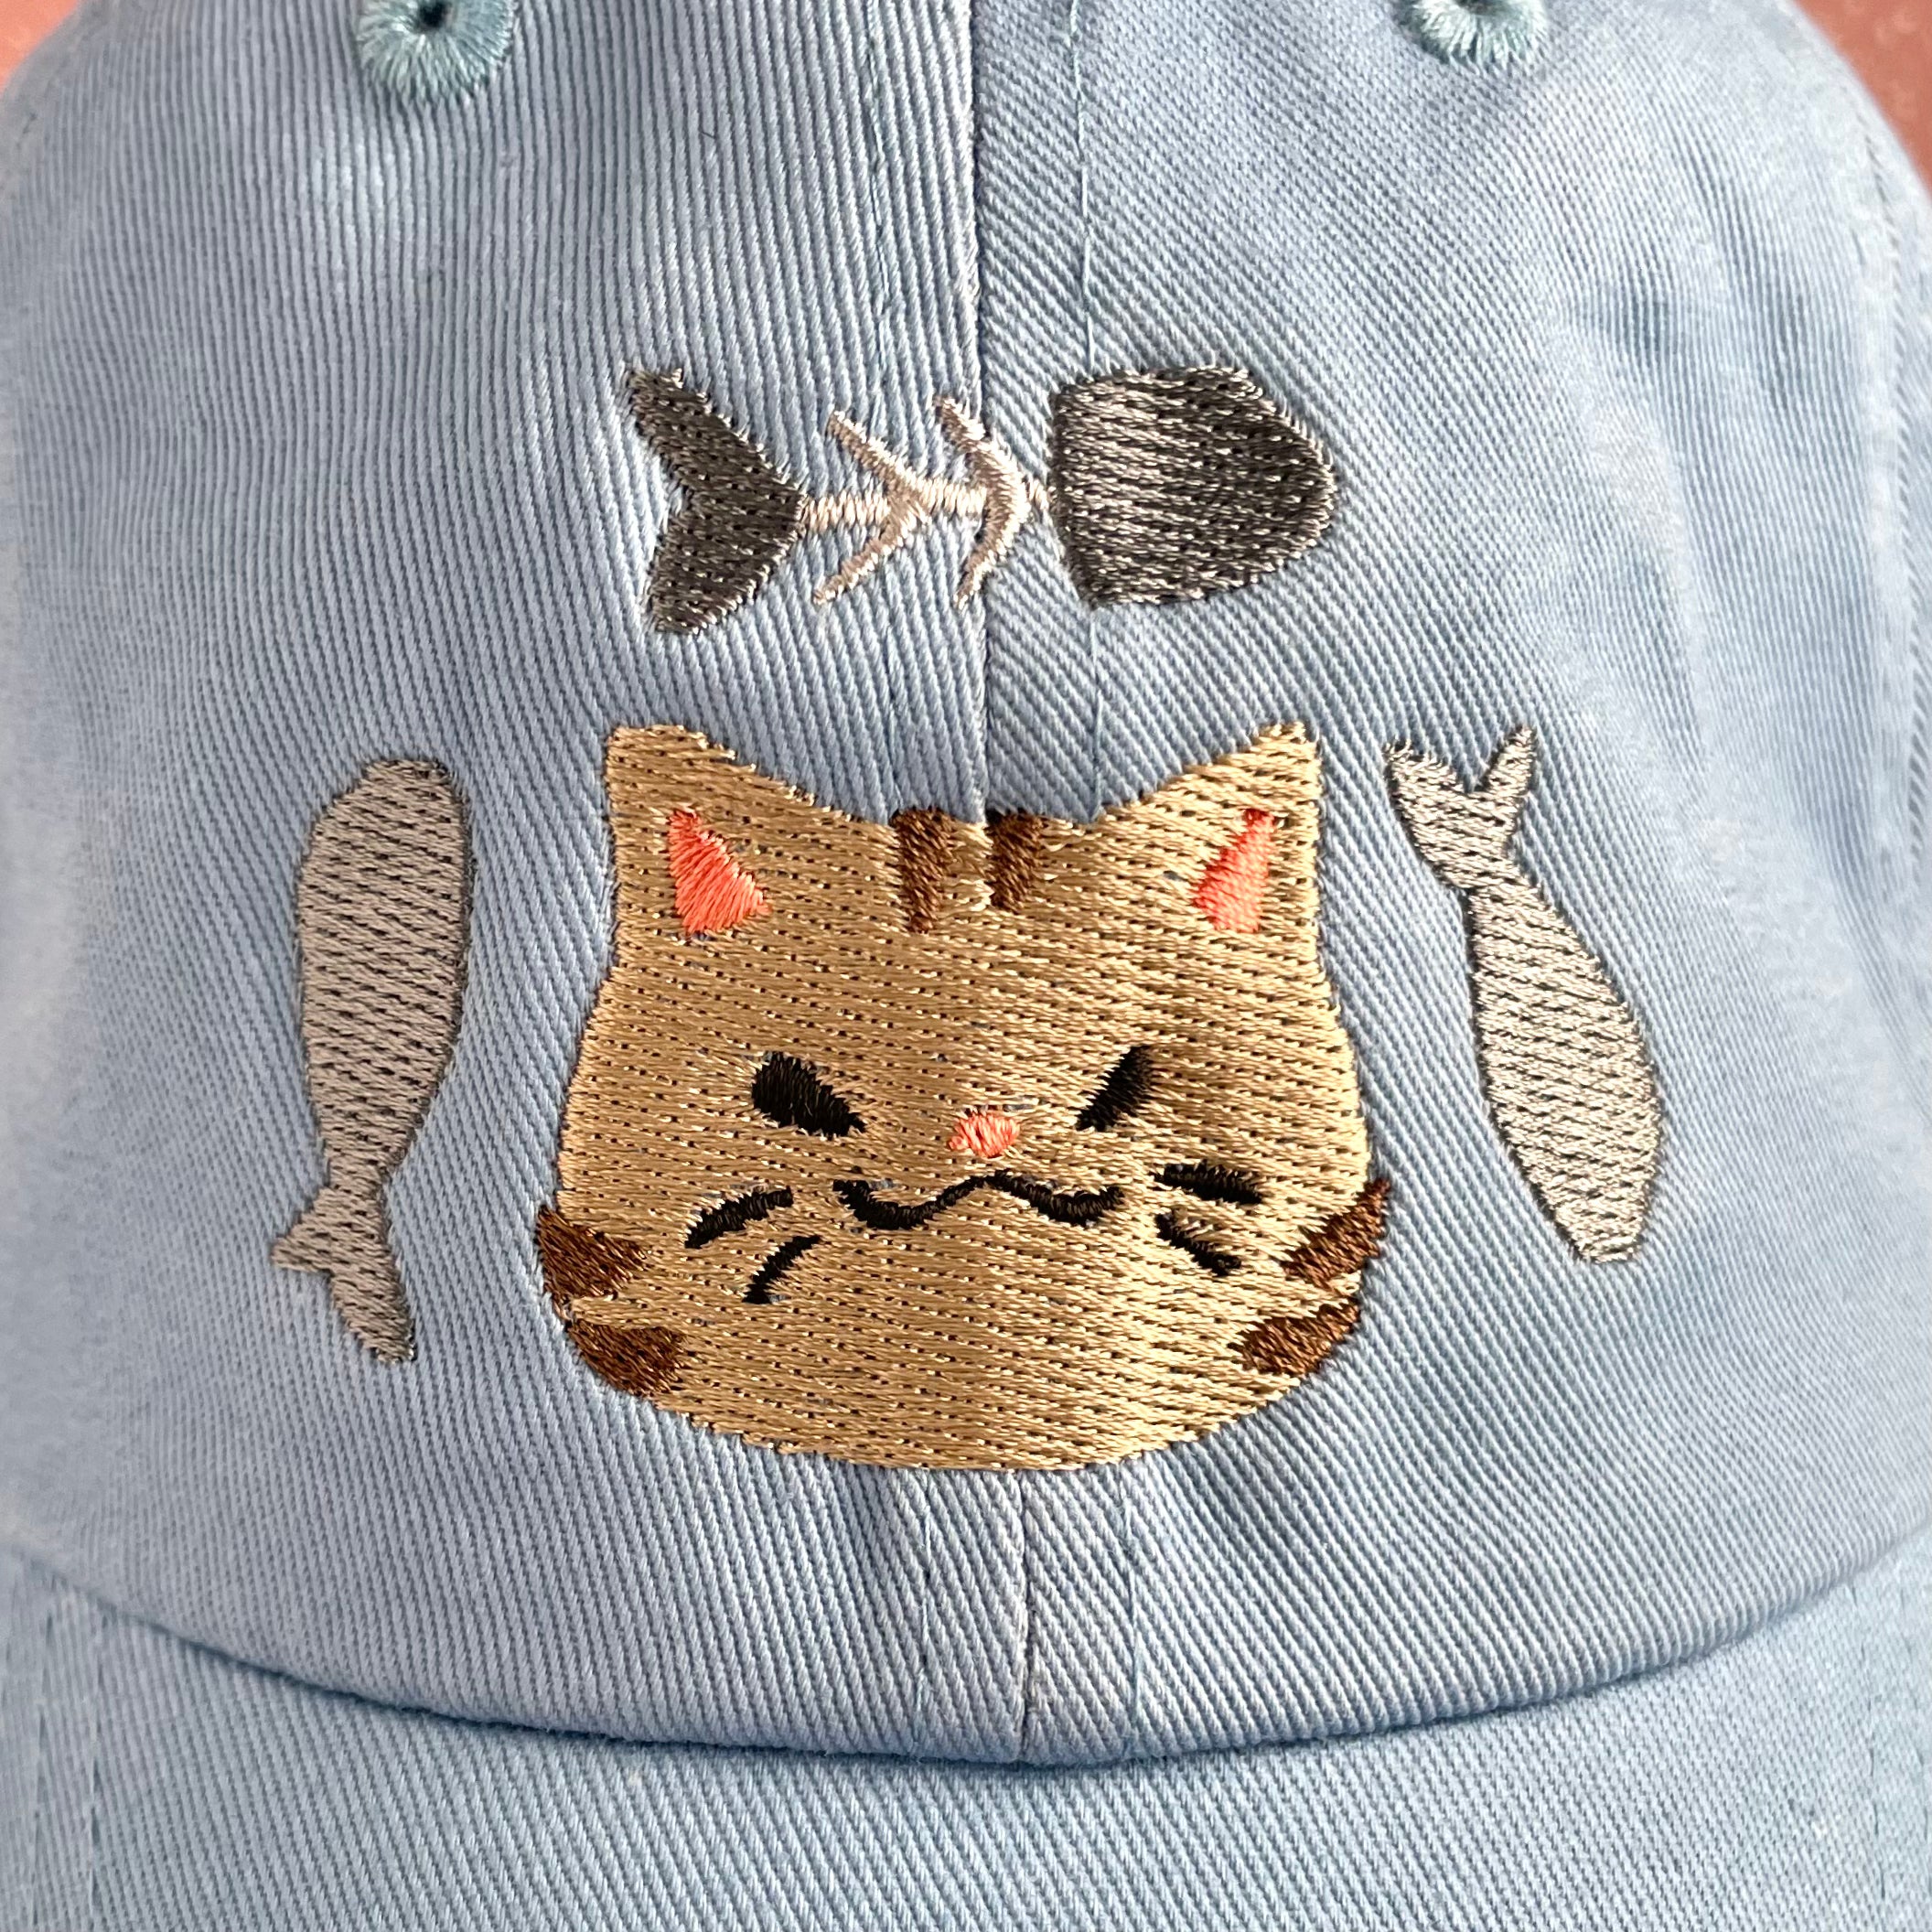 TABBY CAT WITH FISHES DAD HAT